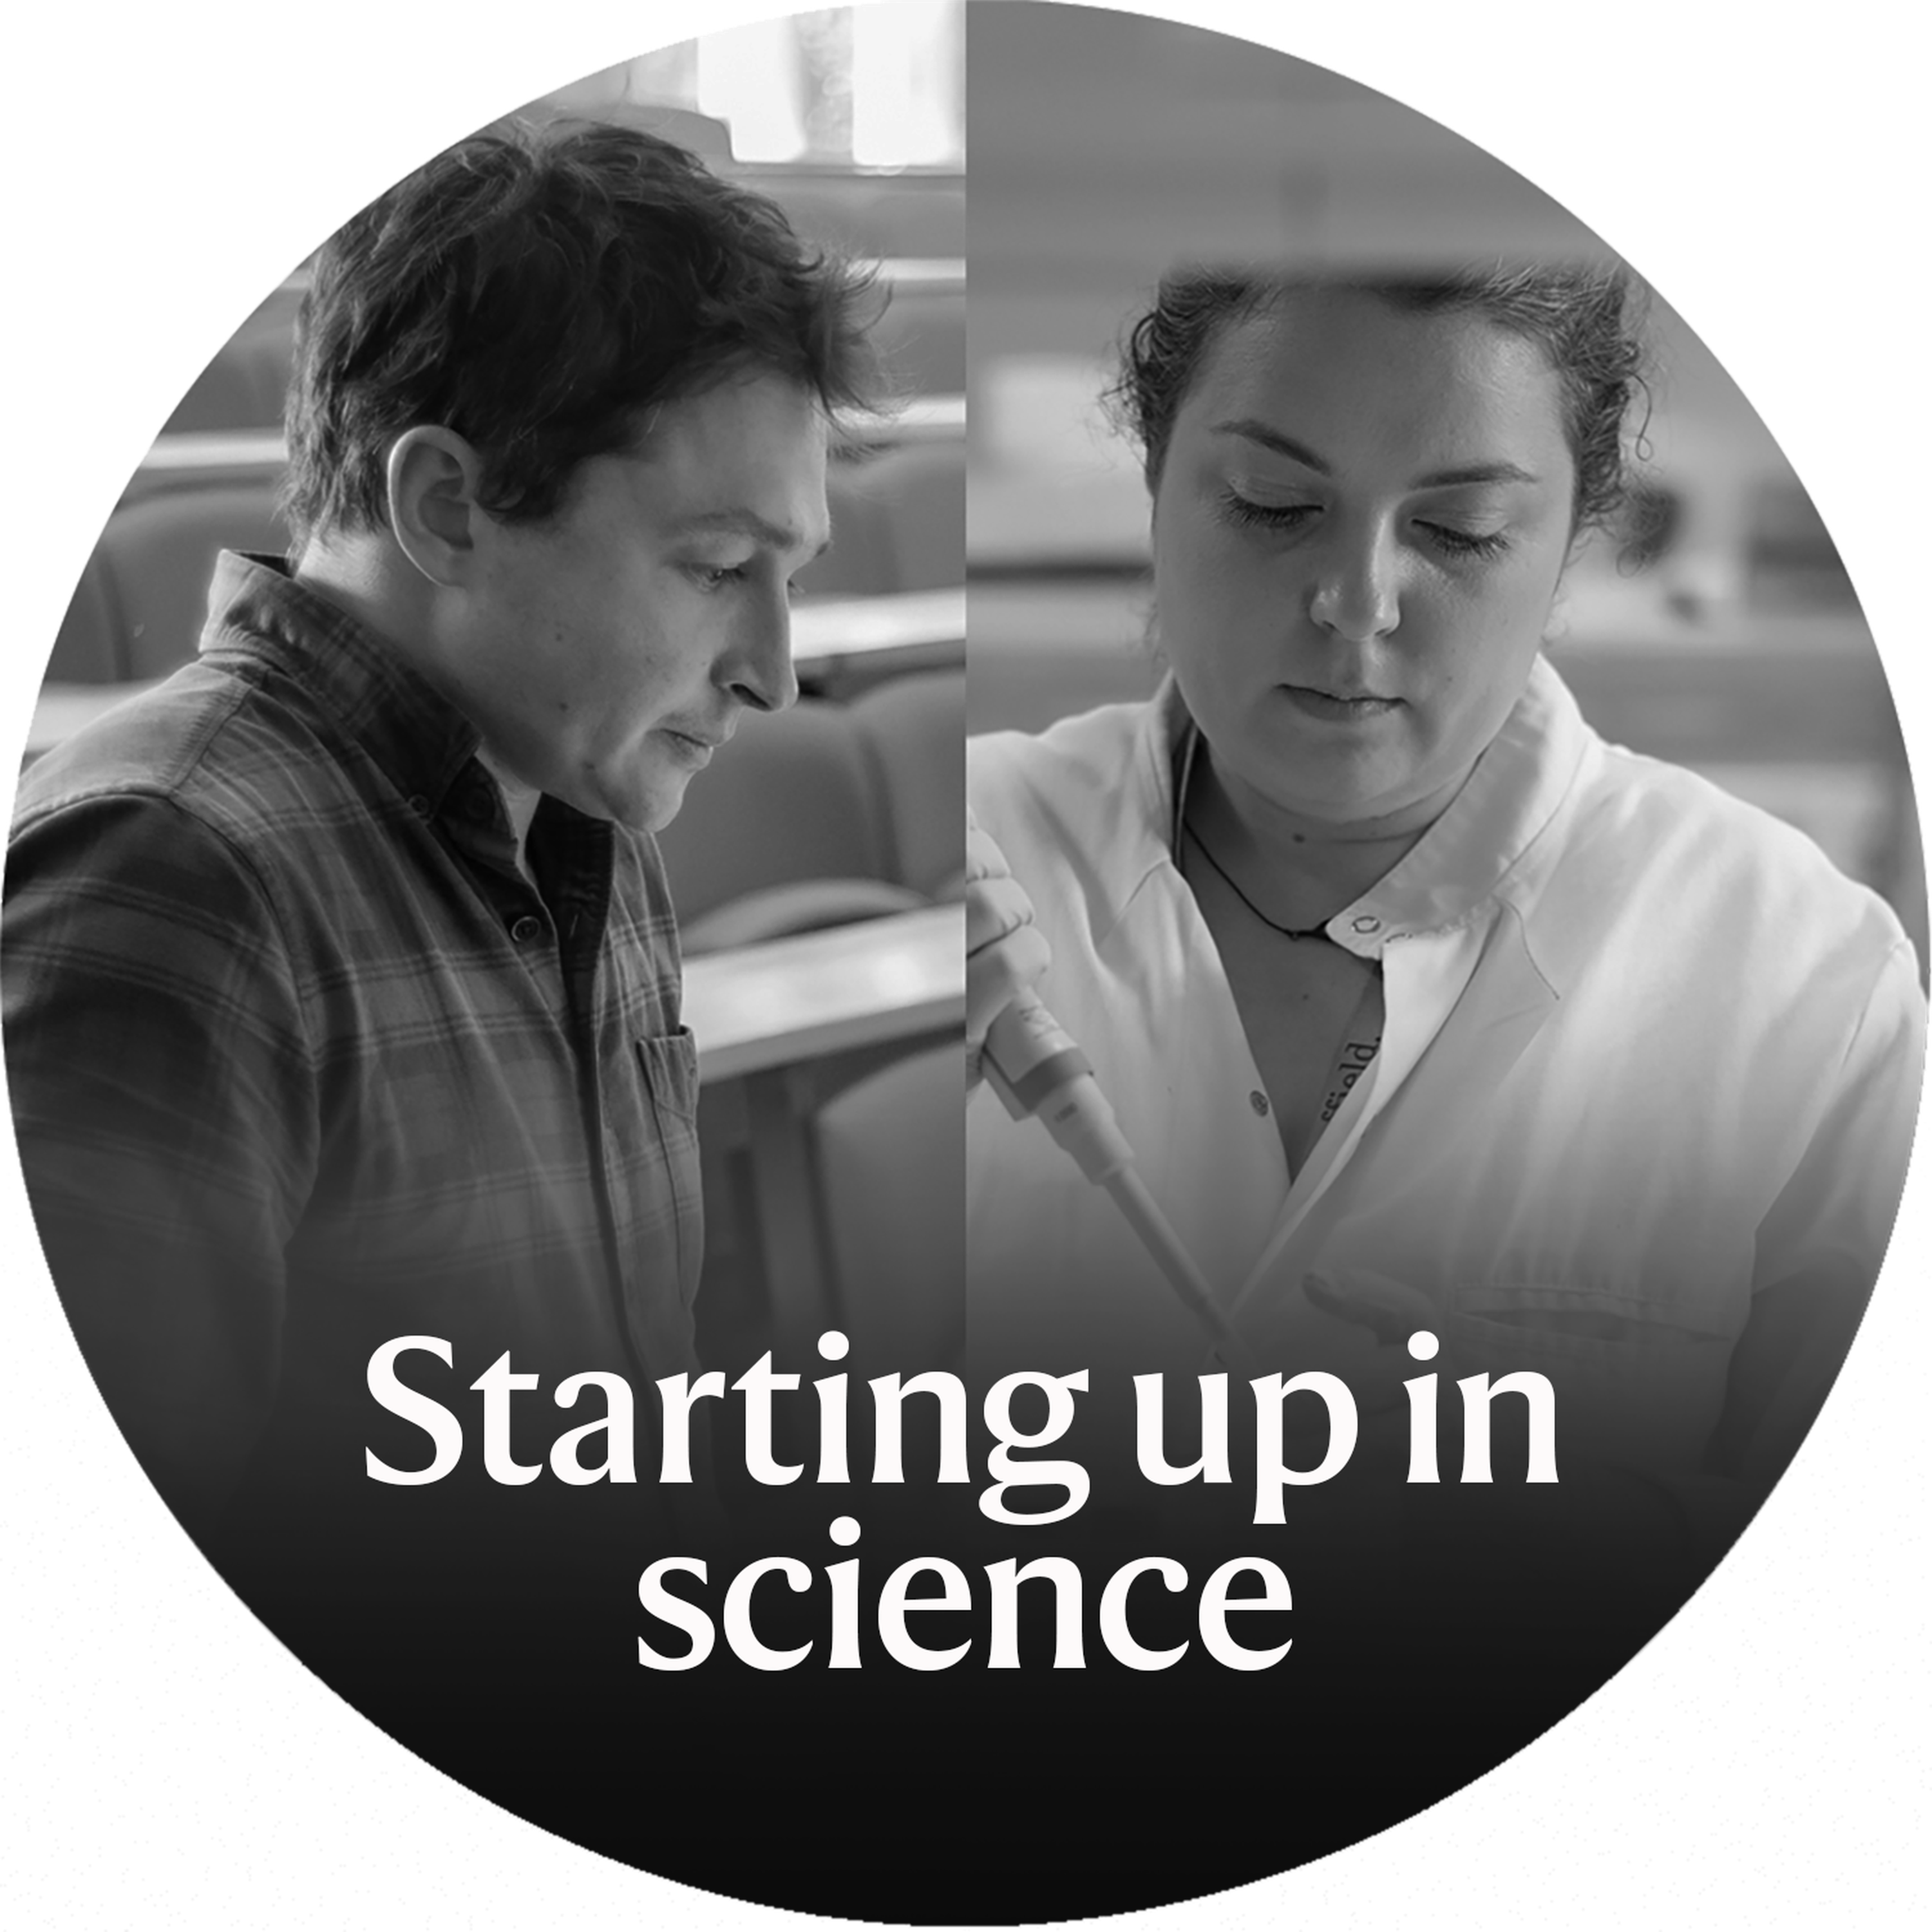 Starting up in science: behind the scenes